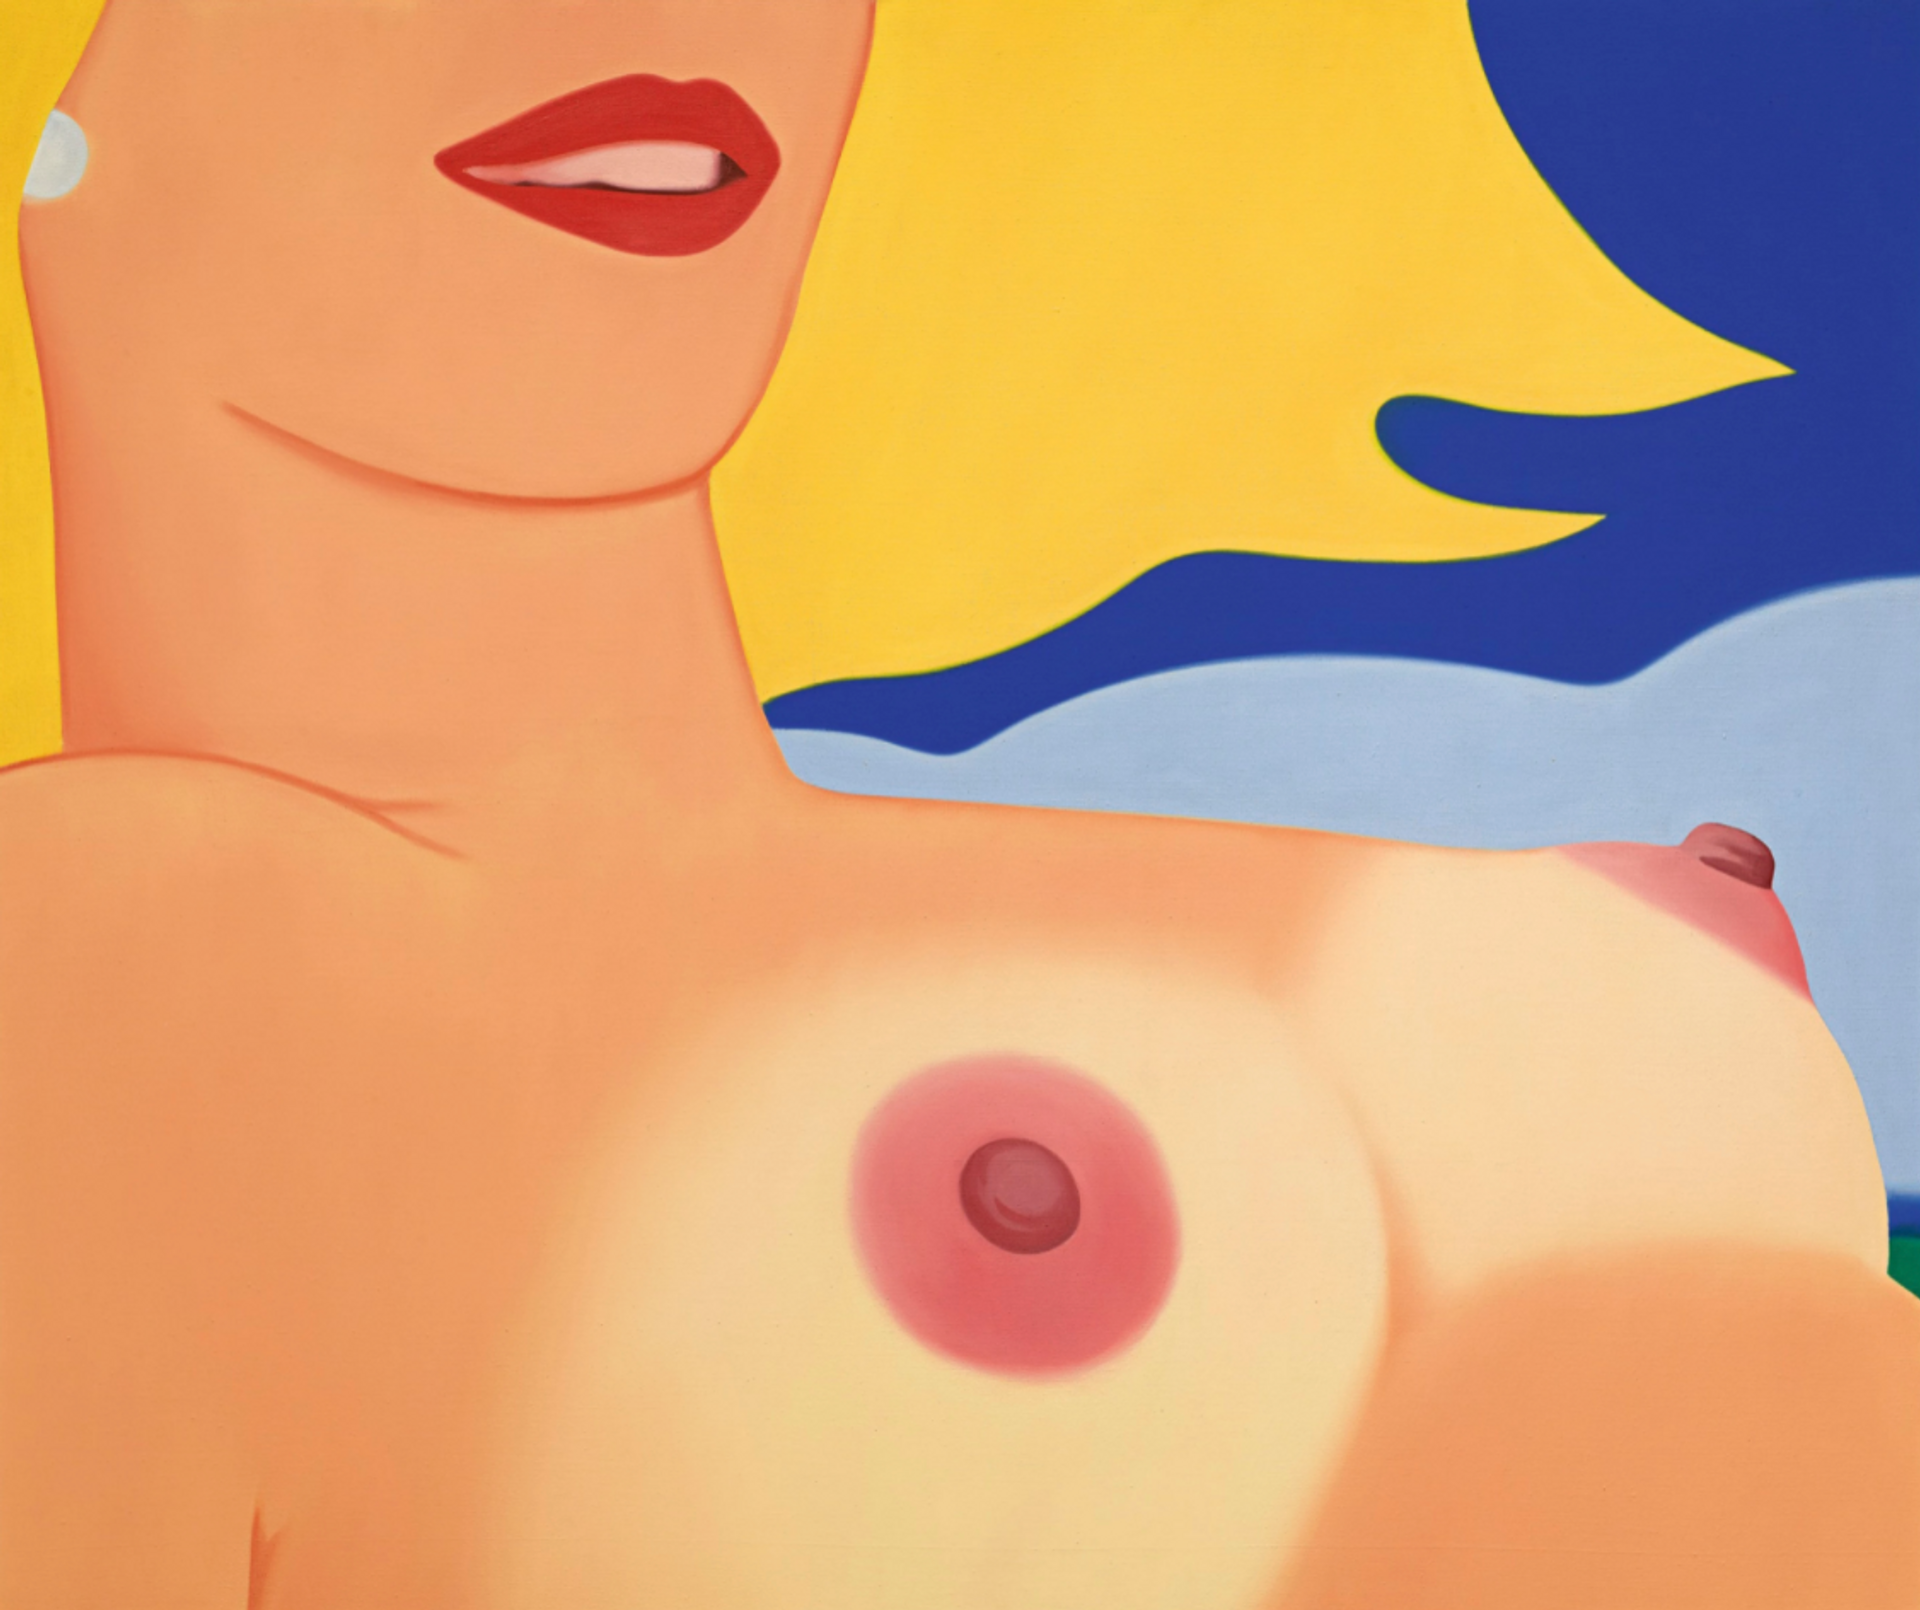 18 Year Old on the Beach by Tom Wesselmann